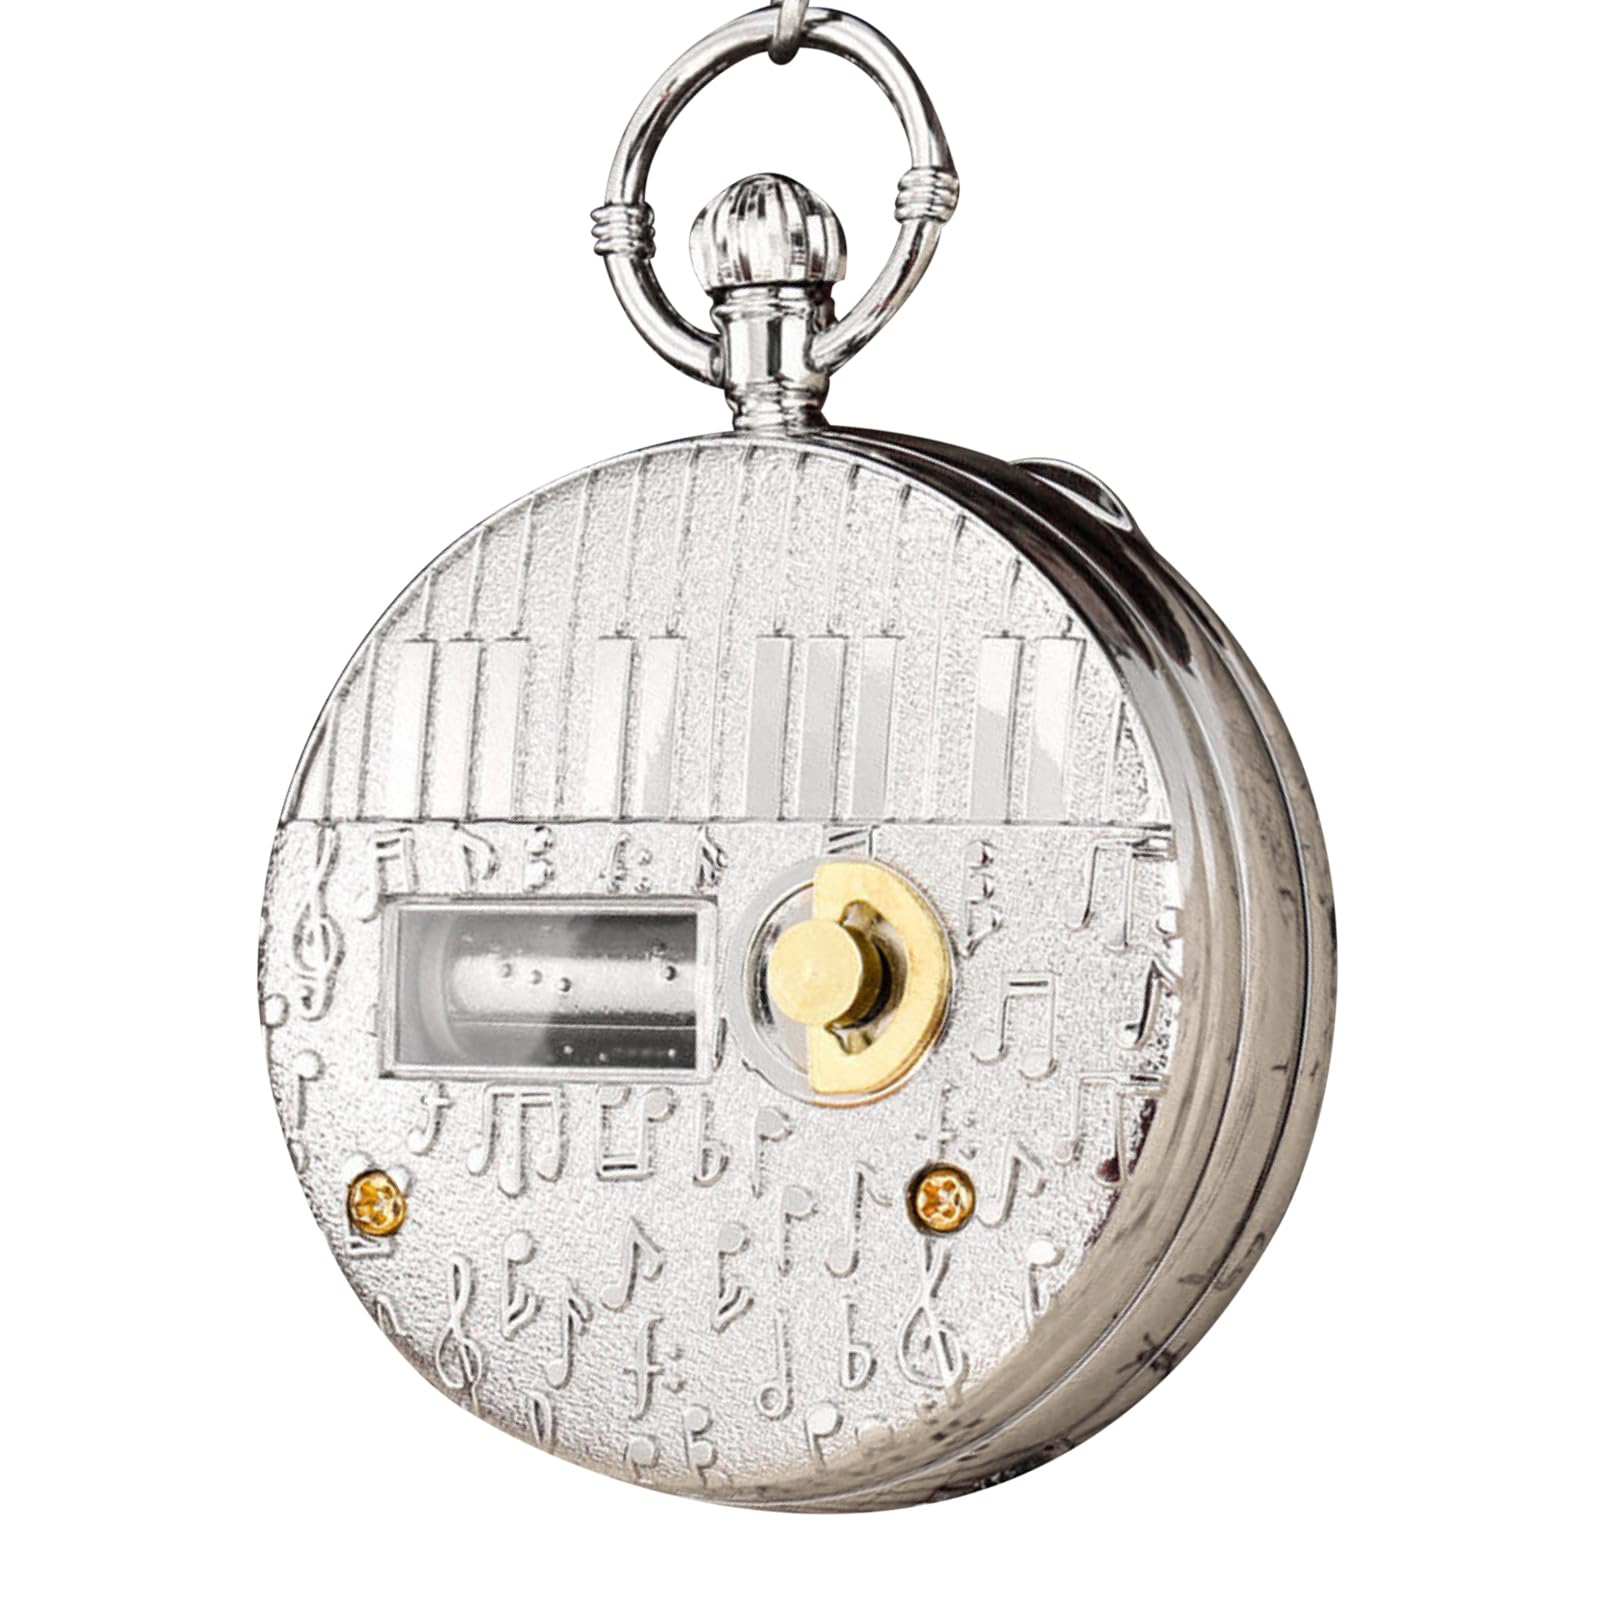 MOUDOAUER Railroad Train Shield Round Case Quartz Pocket Watch, with Music Box Function, Can Play The Music